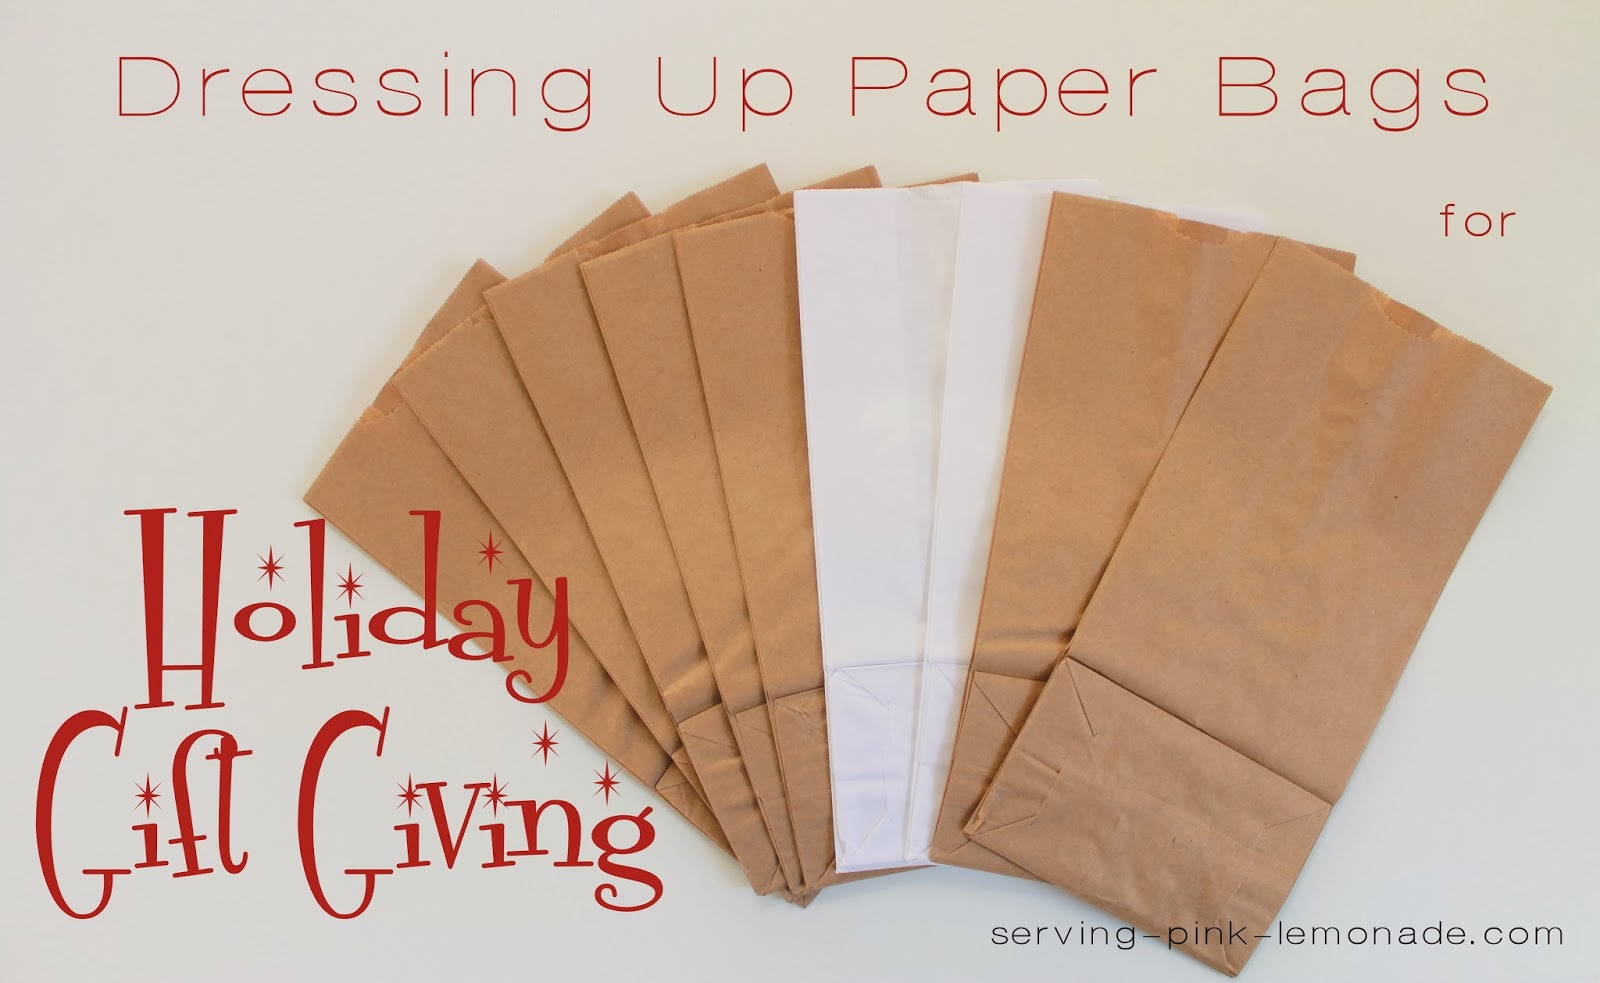 Gift giving term paper